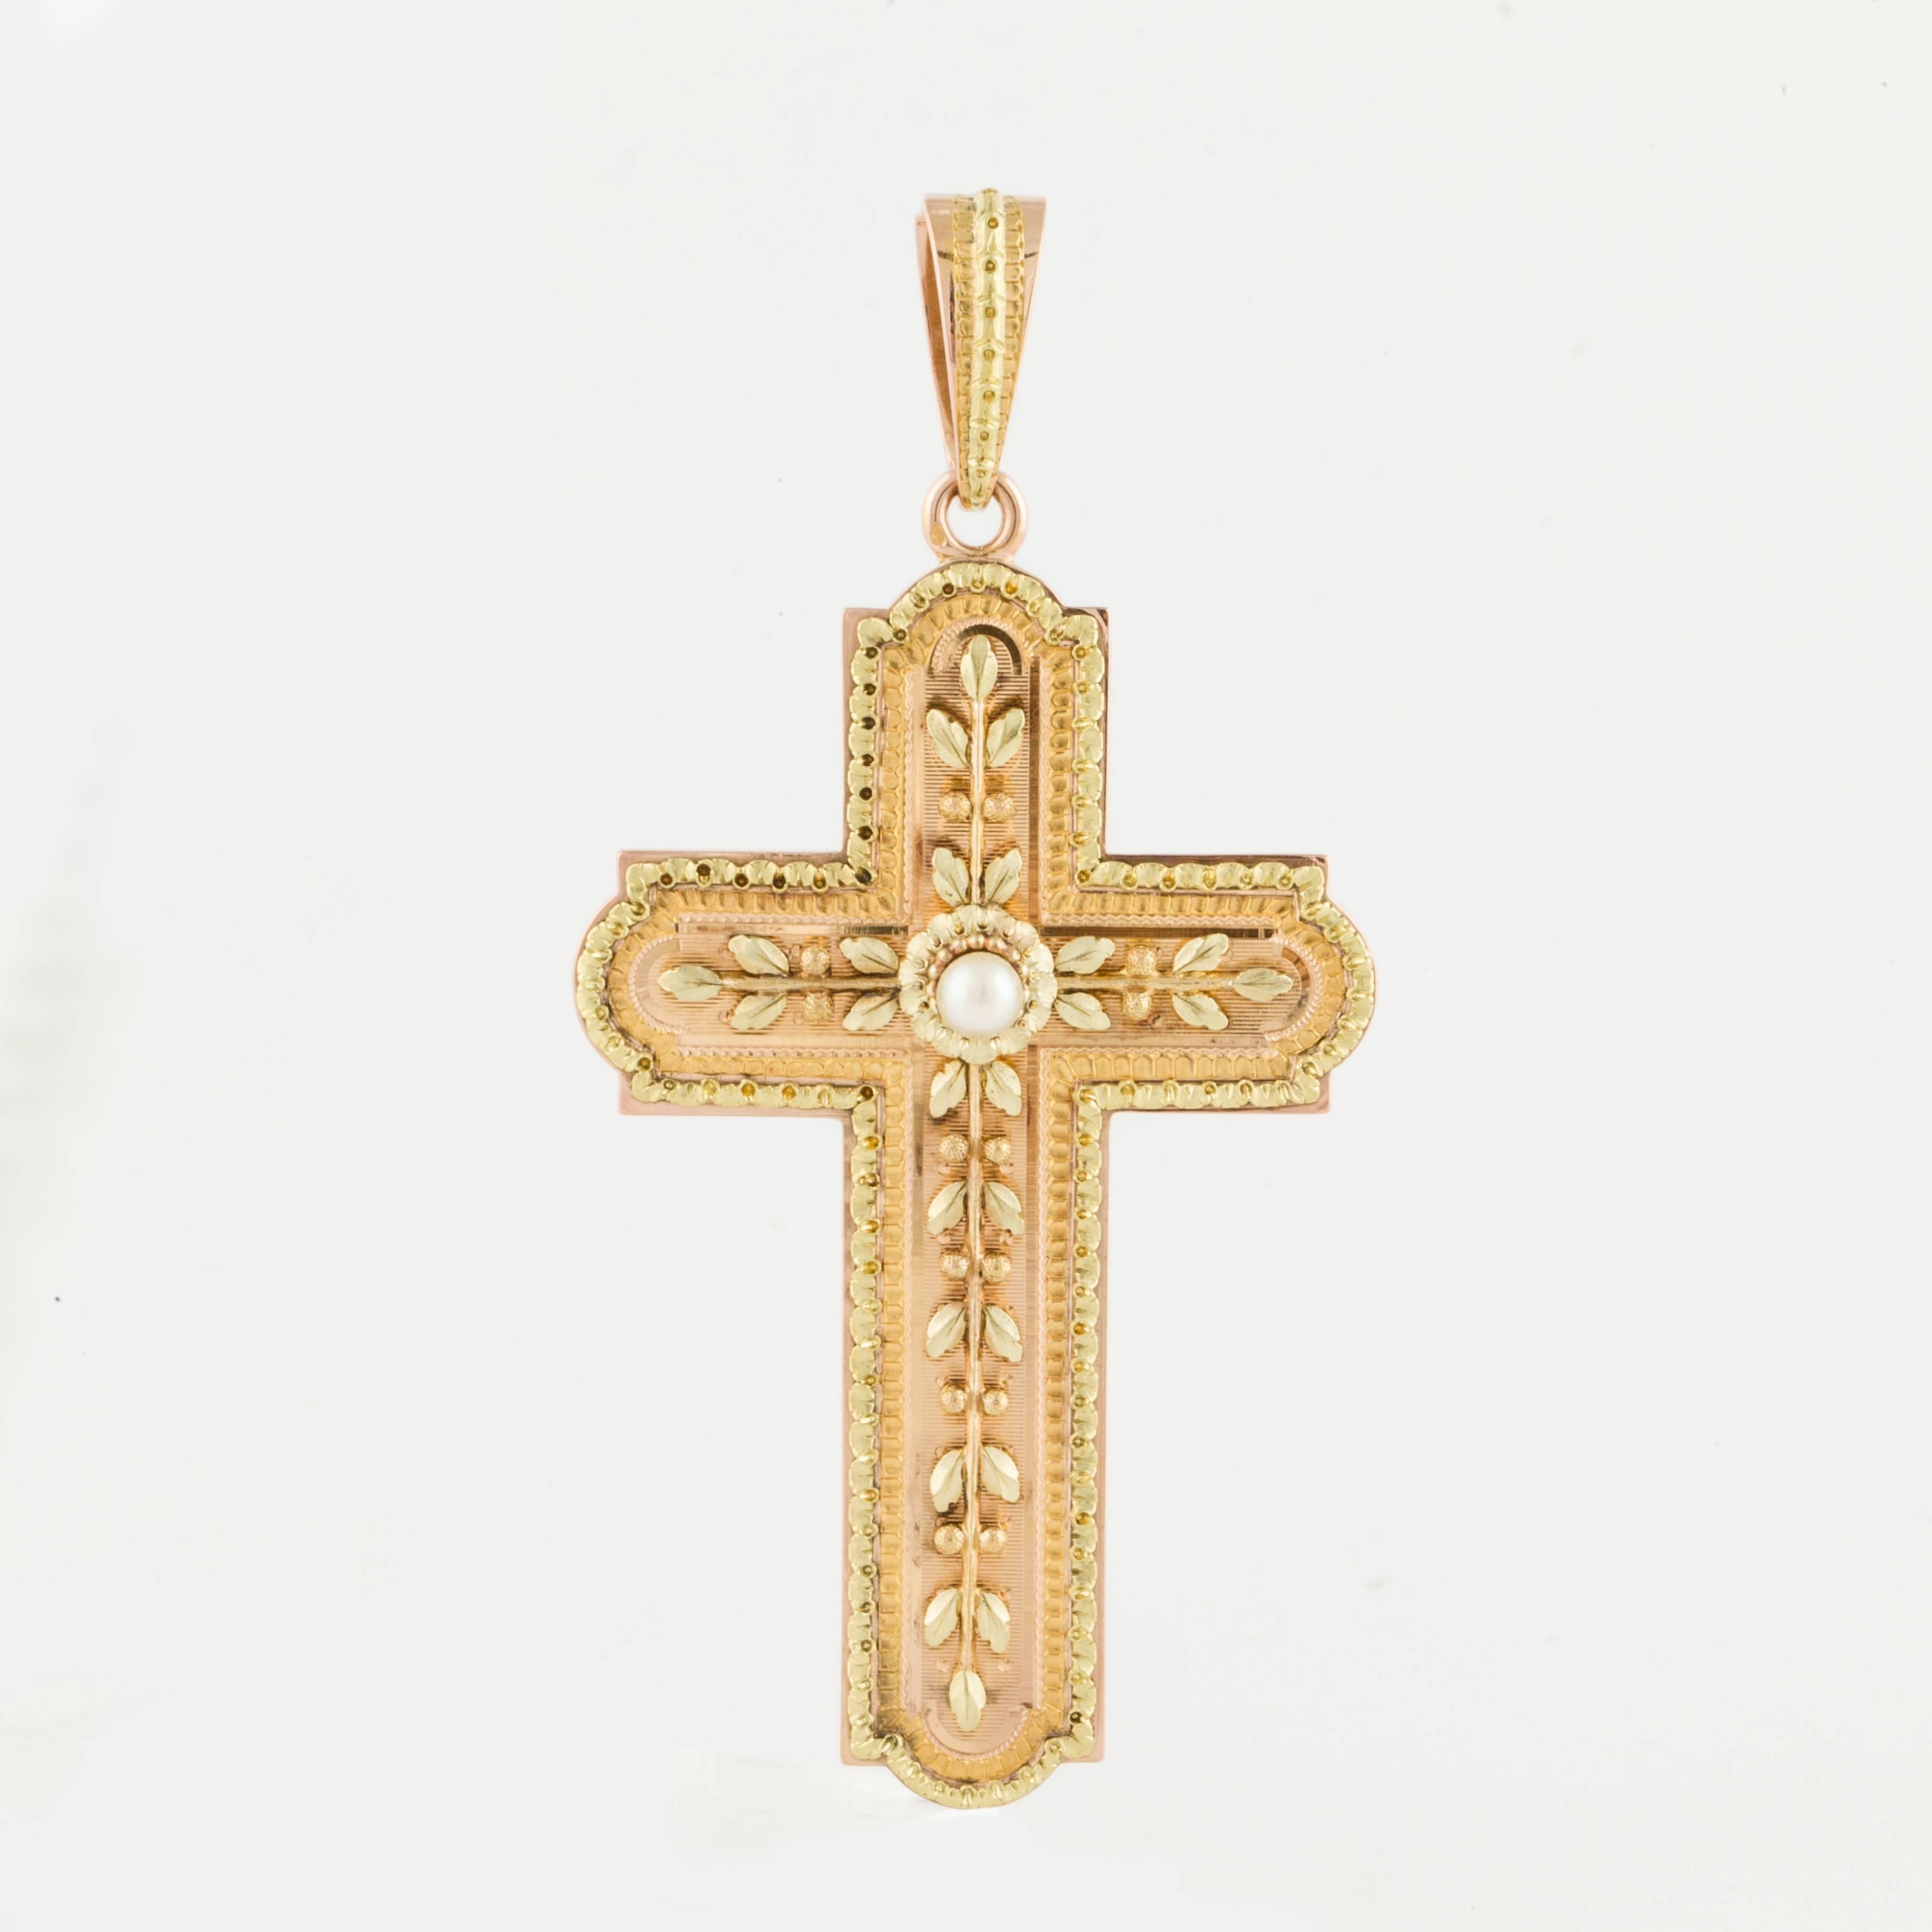 Beautiful 18K cross pendant in two tone gold (yellow and rose).  Delicate Etruscan work and leaf design highlighted with a 4.7mm cultured pearl in the center.  French hallmarks on the back of the bale.  The bale is also decorated with Etruscan work.